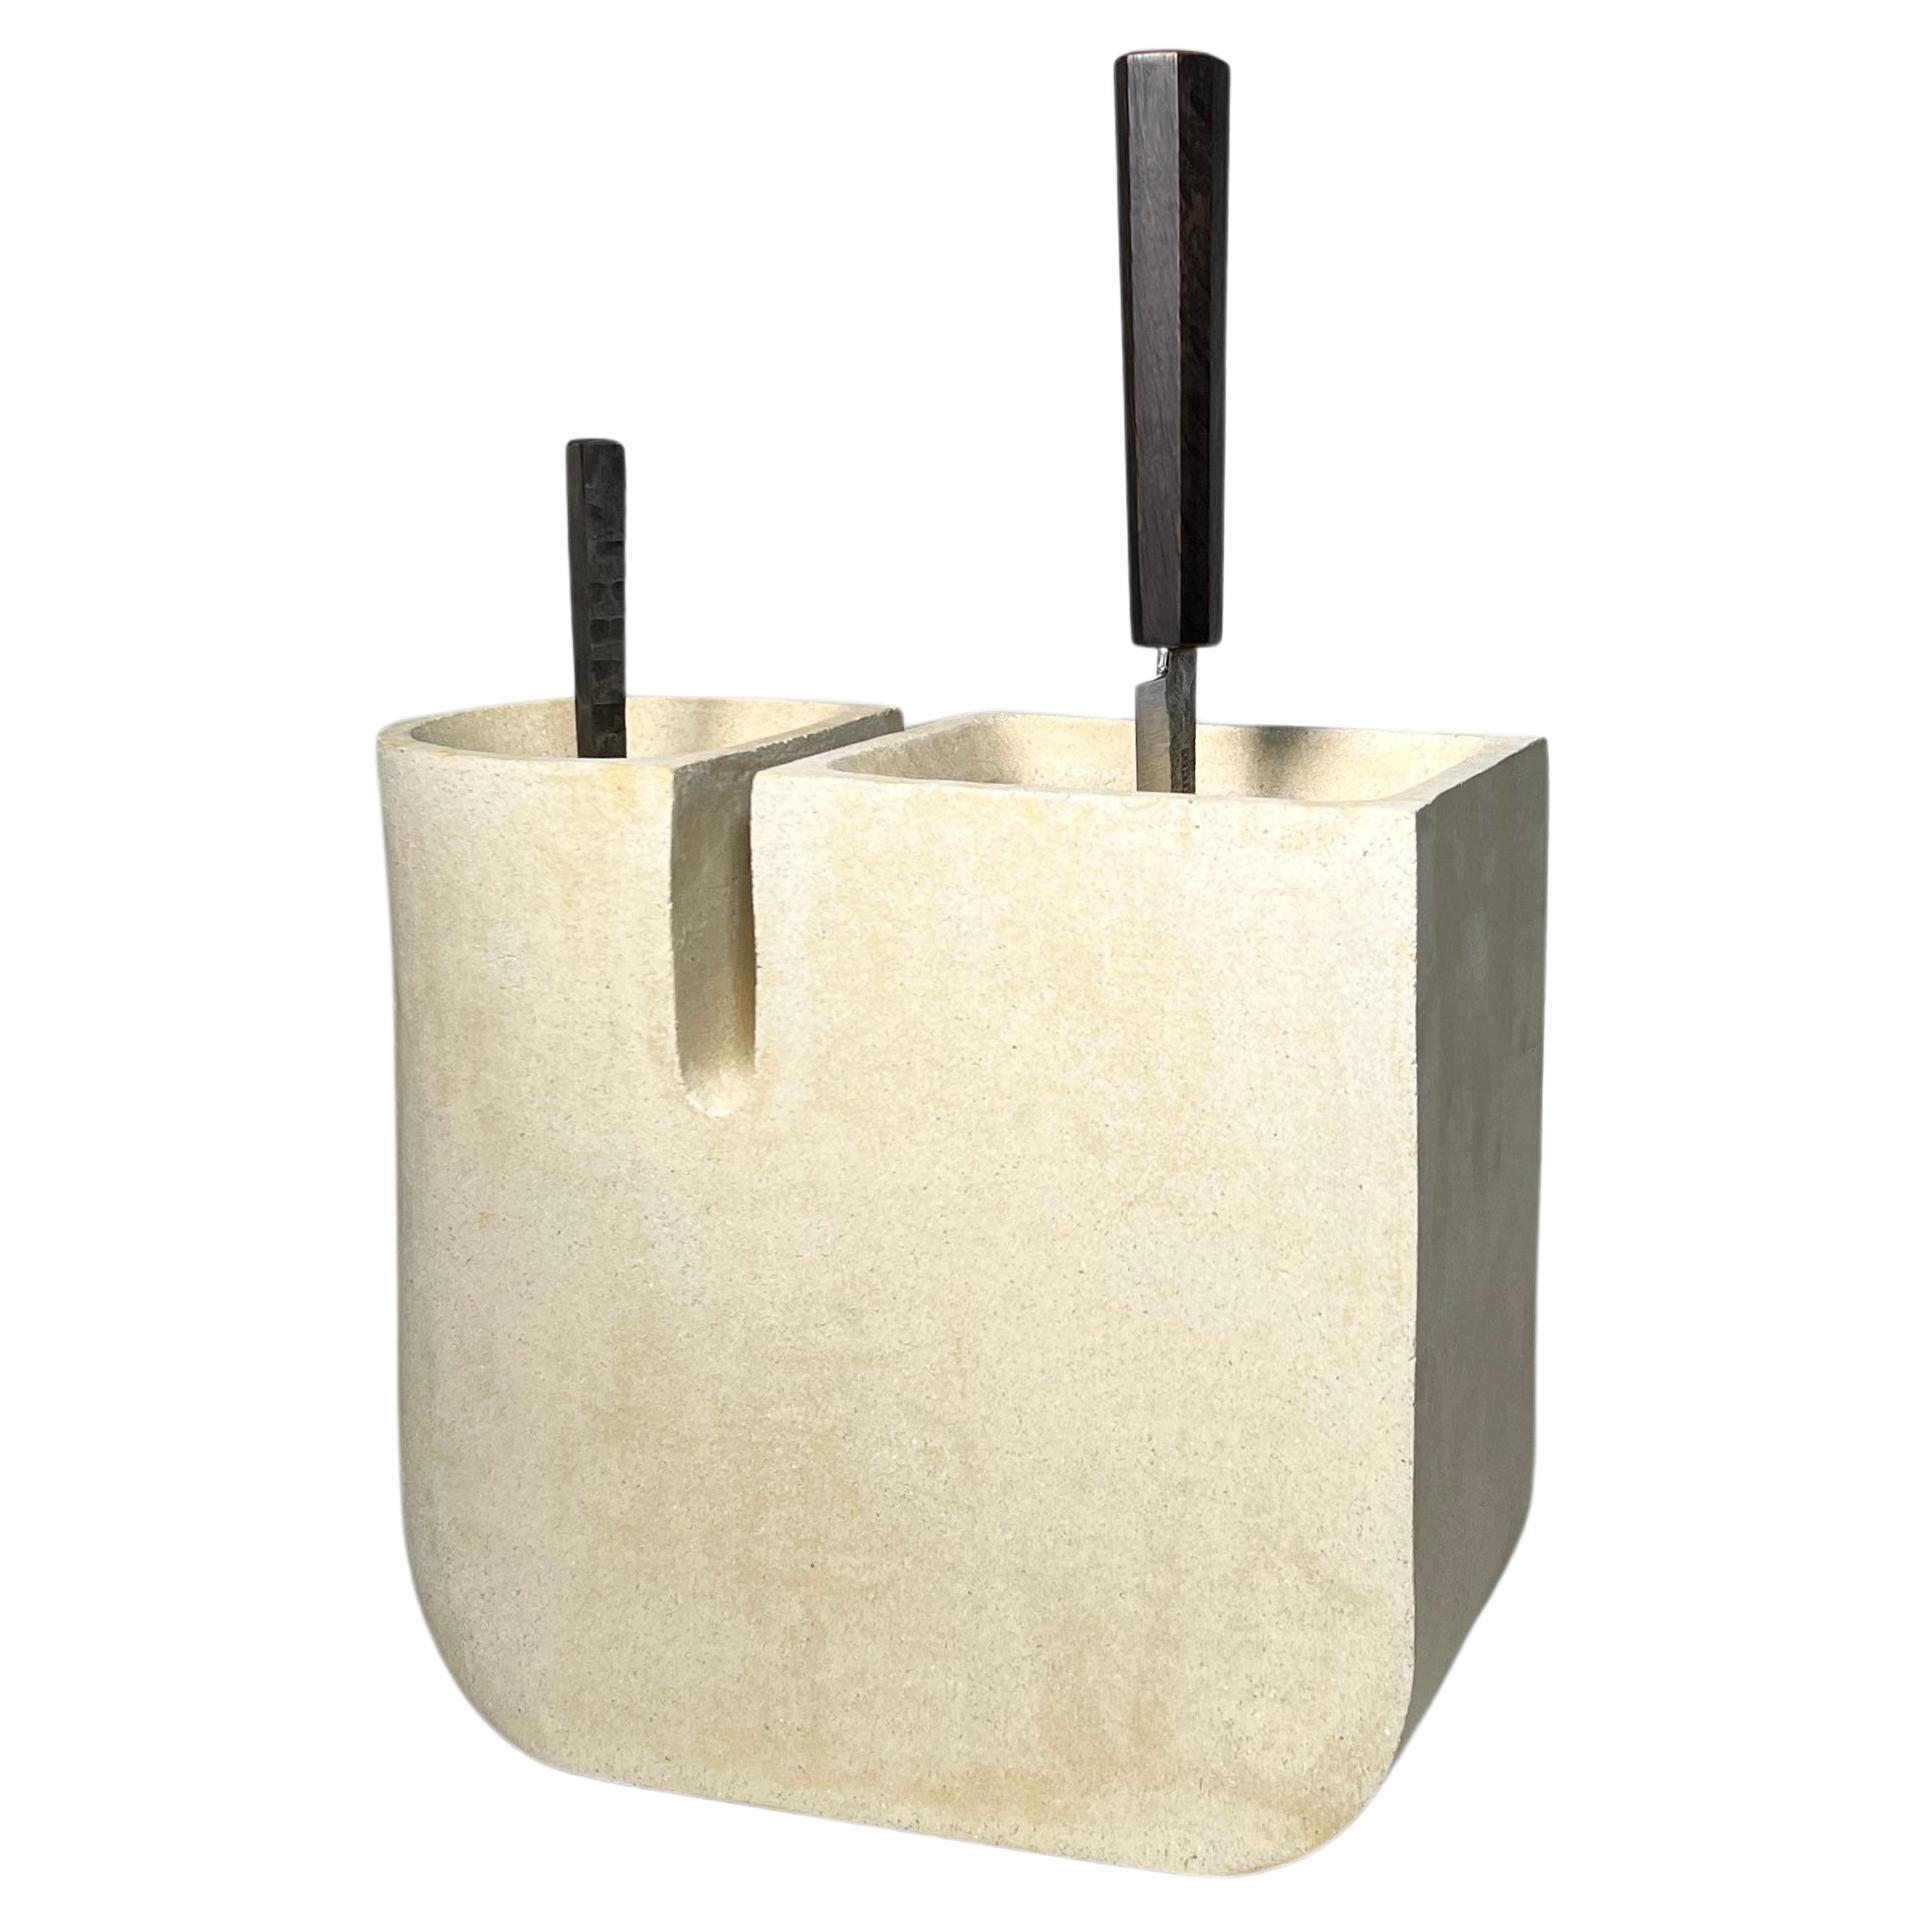 Media Knife Block in Ceramic with Glaze Options Available by Piscina For Sale